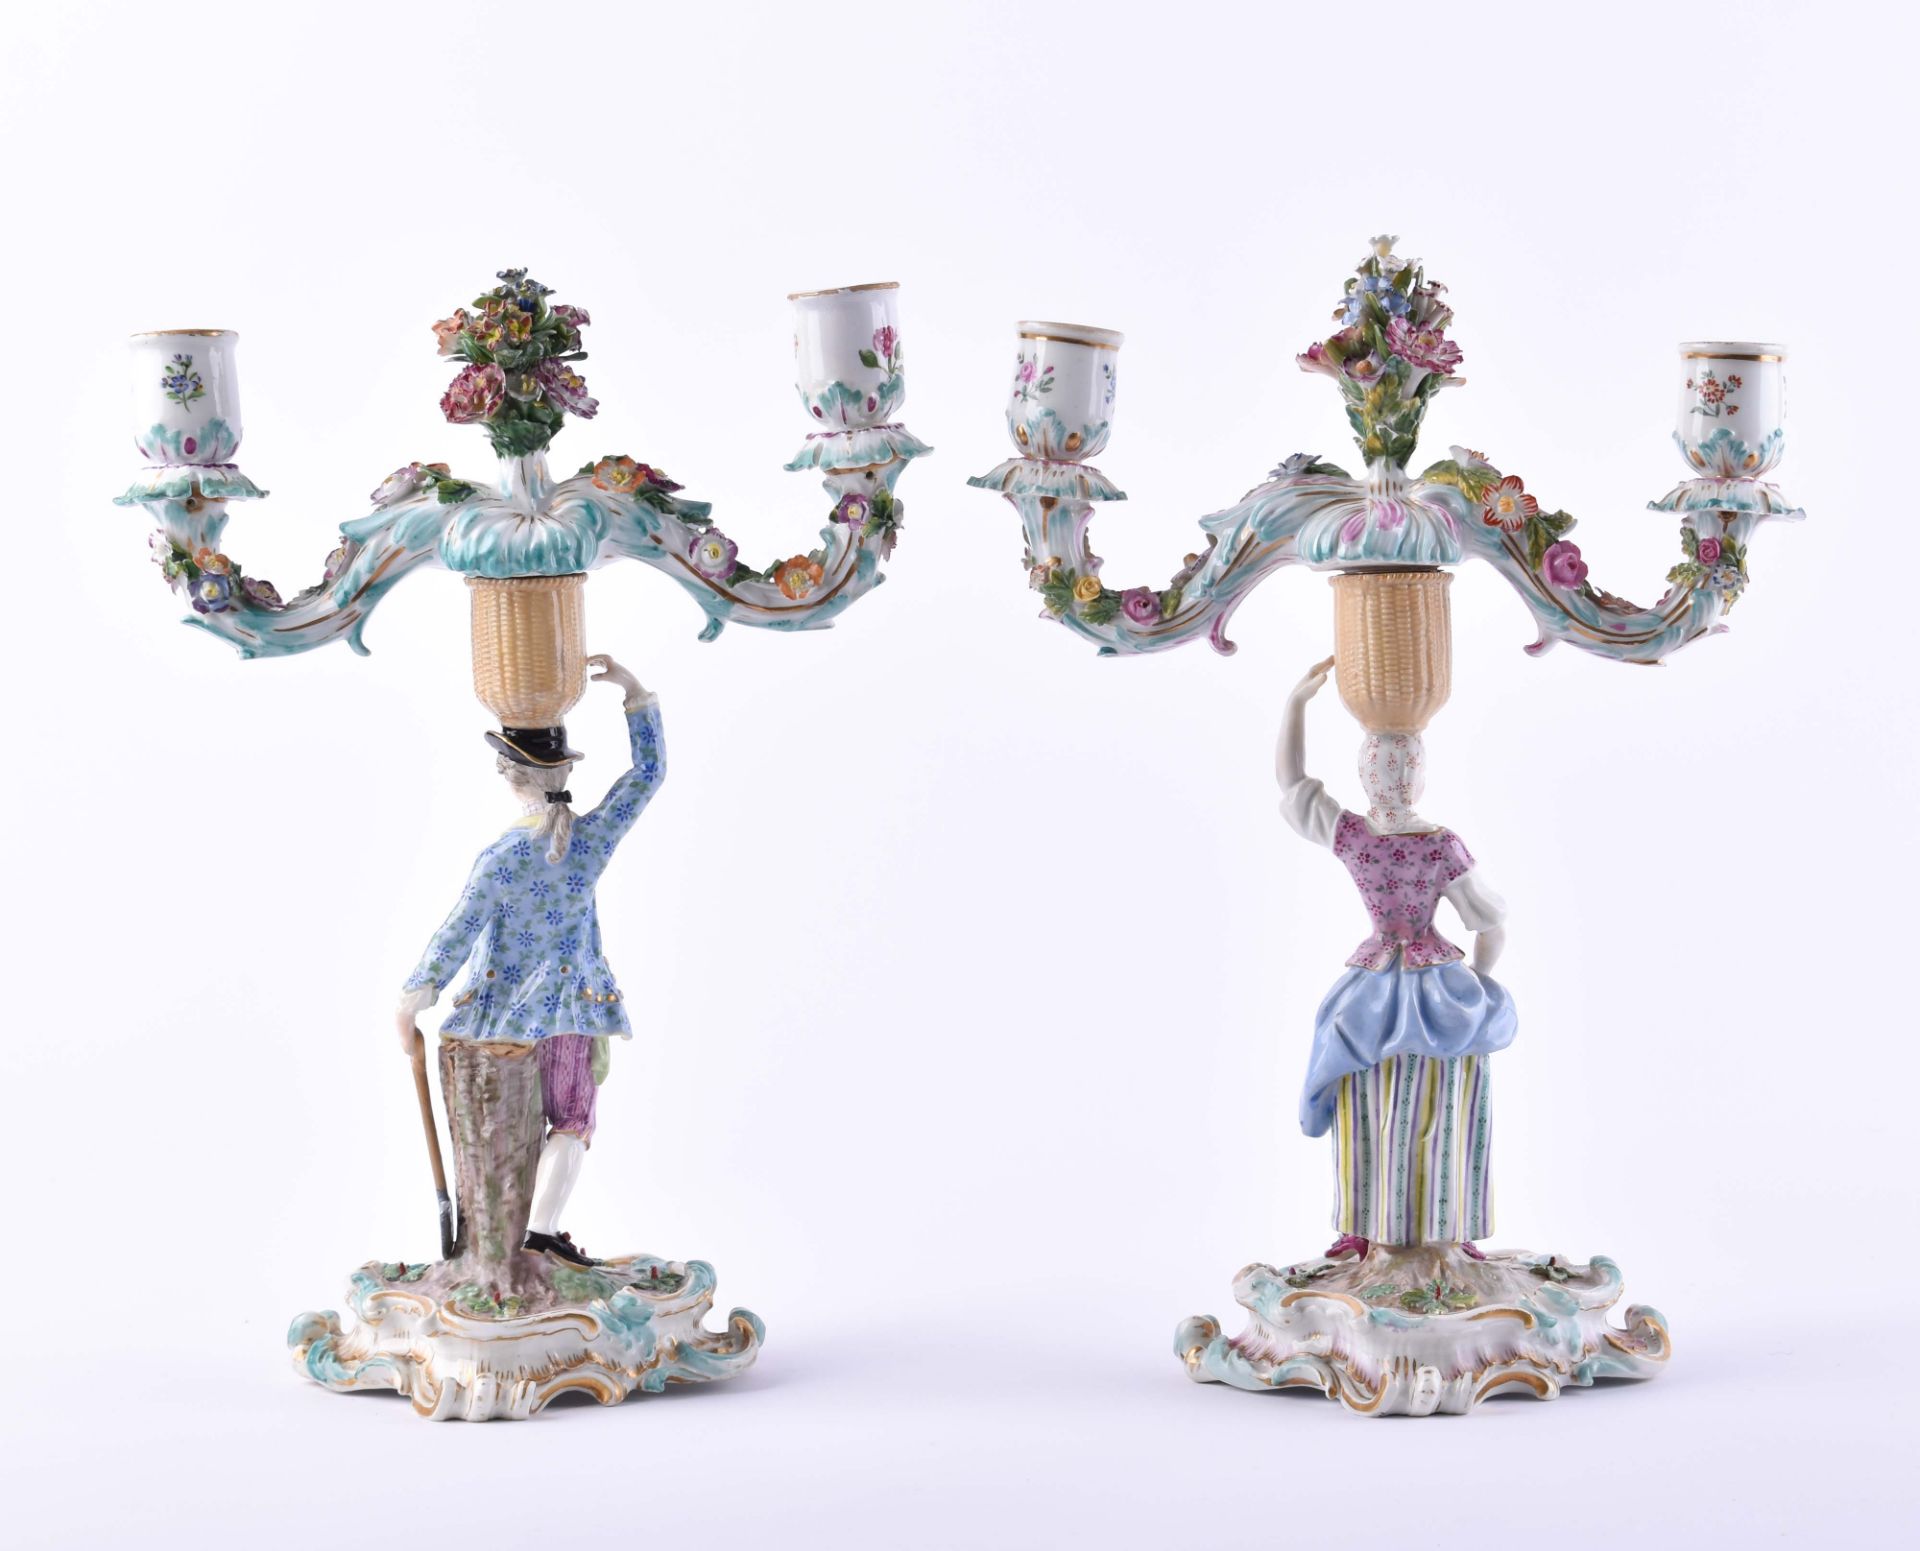  figural pair of candlesticks Meissen 19th century - Image 4 of 9